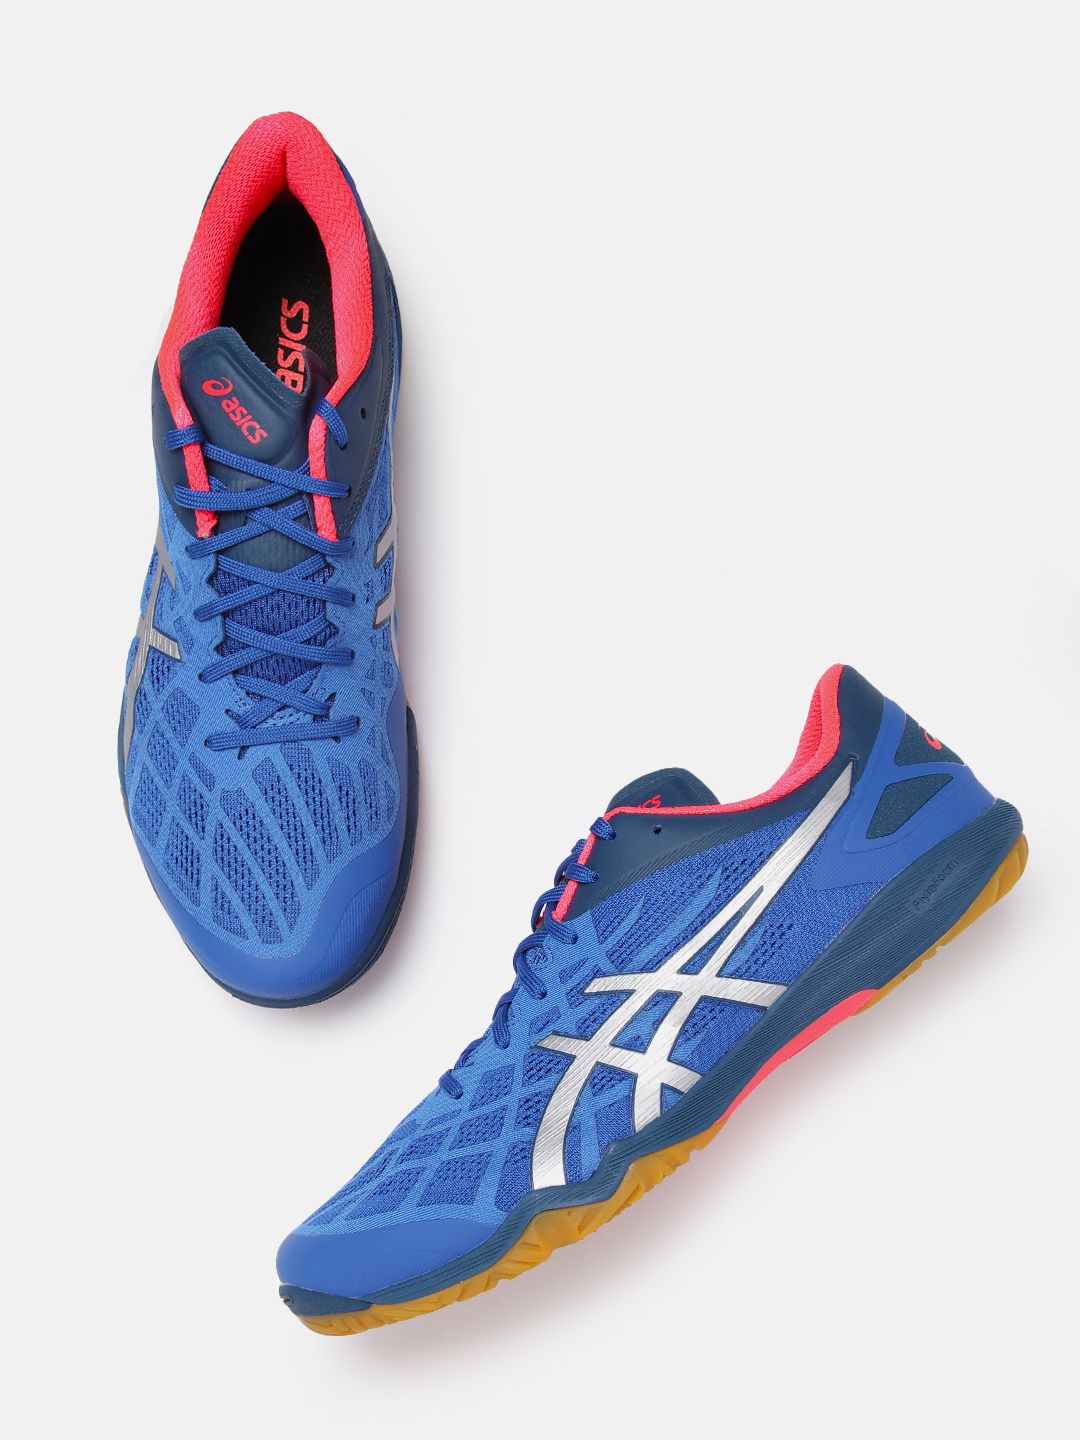 ASICS Unisex Blue & Grey Woven Design Attack Dominate FF 2 Badminton Shoes Price in India